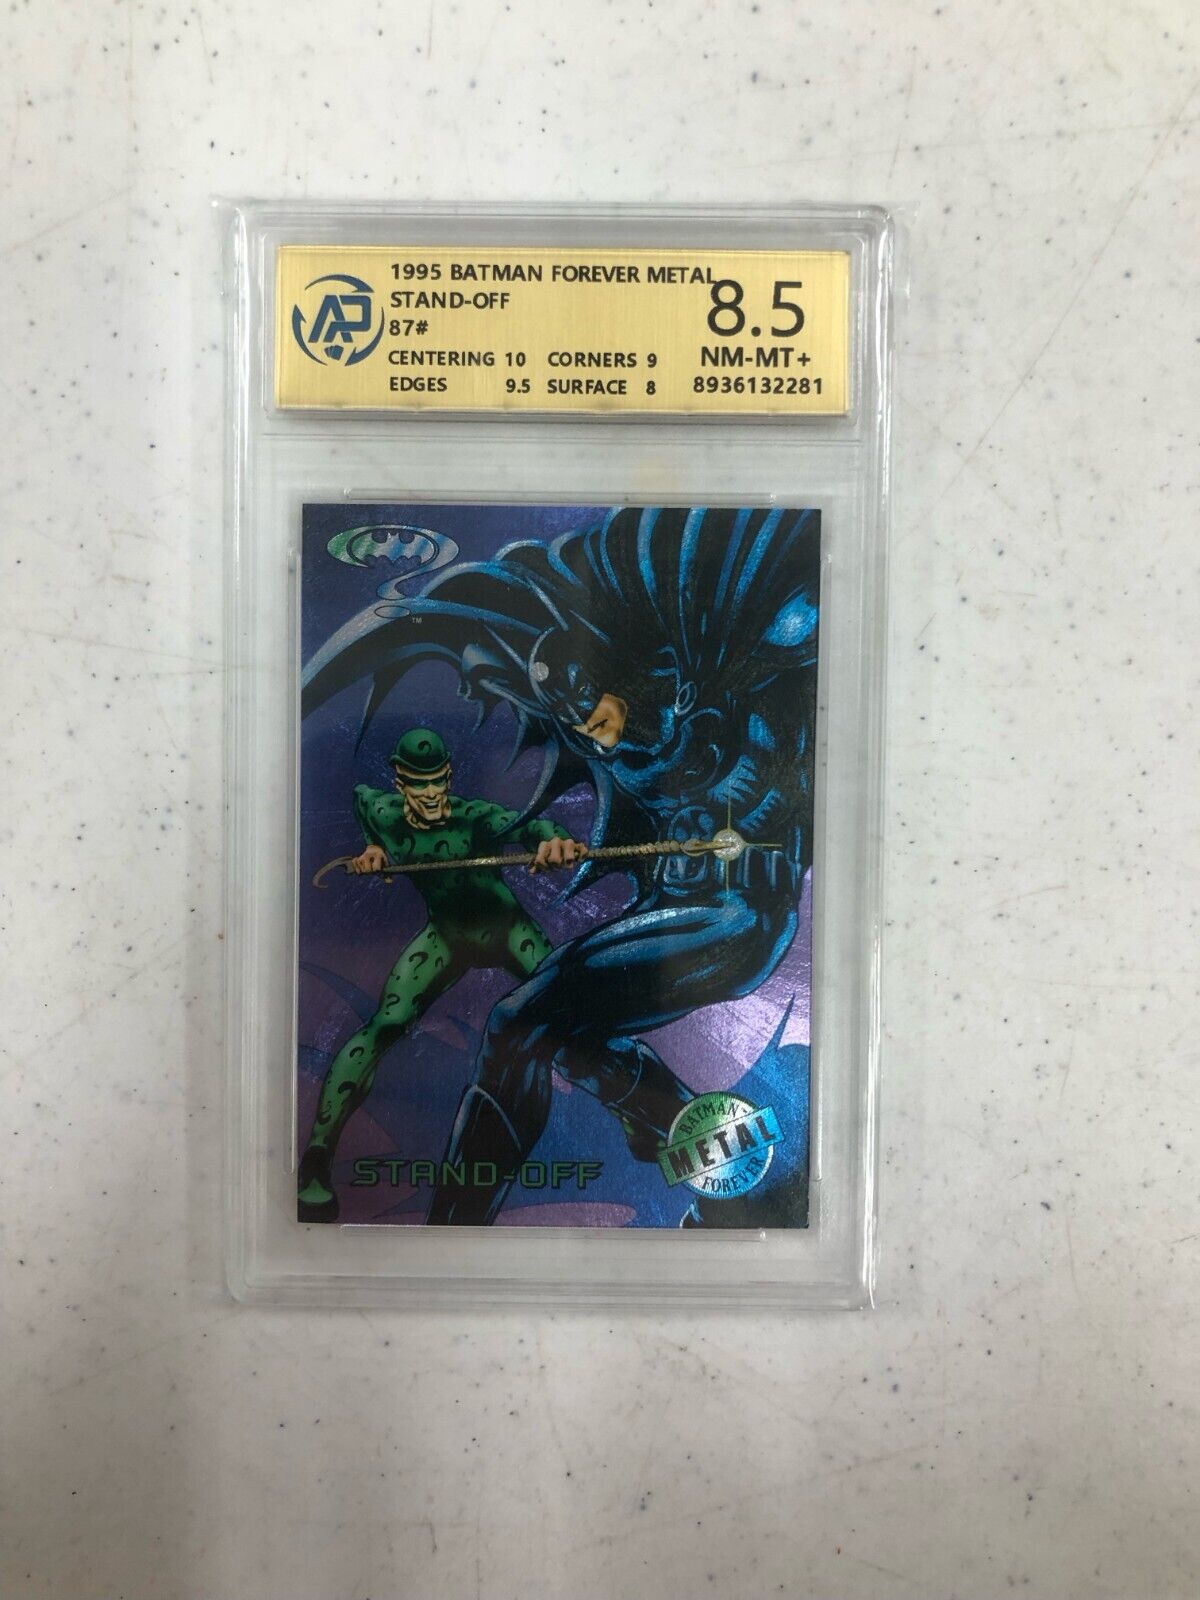 1995 DC Comics Batman Forever Metal Stand-Off Non-Sports Trading Card Graded 8.5